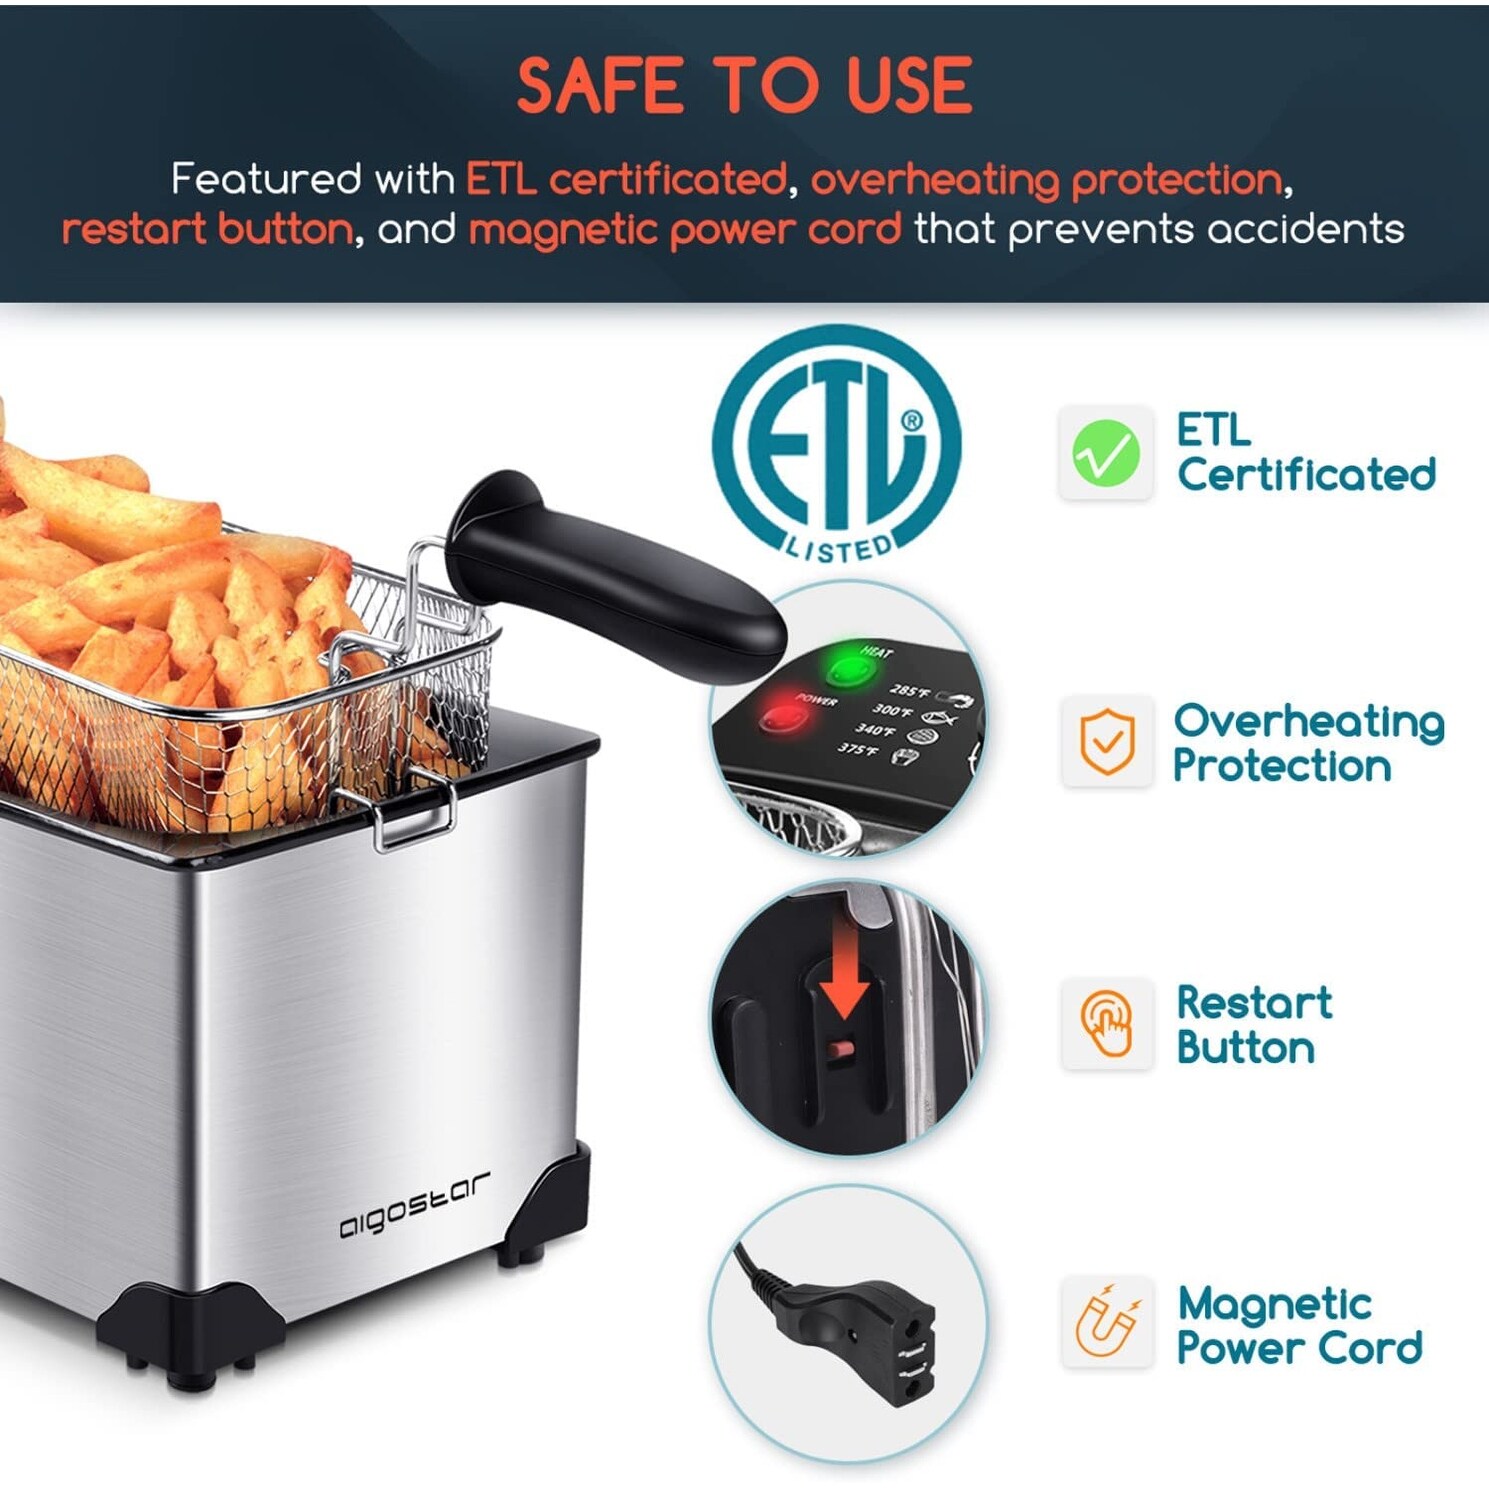 https://ak1.ostkcdn.com/images/products/is/images/direct/a3e0a979614b73152617eaf314d1a8dc9ba50d12/Deep-Fryer%2C-Electric-Deep-Fat-Fryers-with-Baskets%2C-3-Liters-Capacity-Oil-Frying-Pot-with-View-Window%2C-ETL-Certificated.jpg